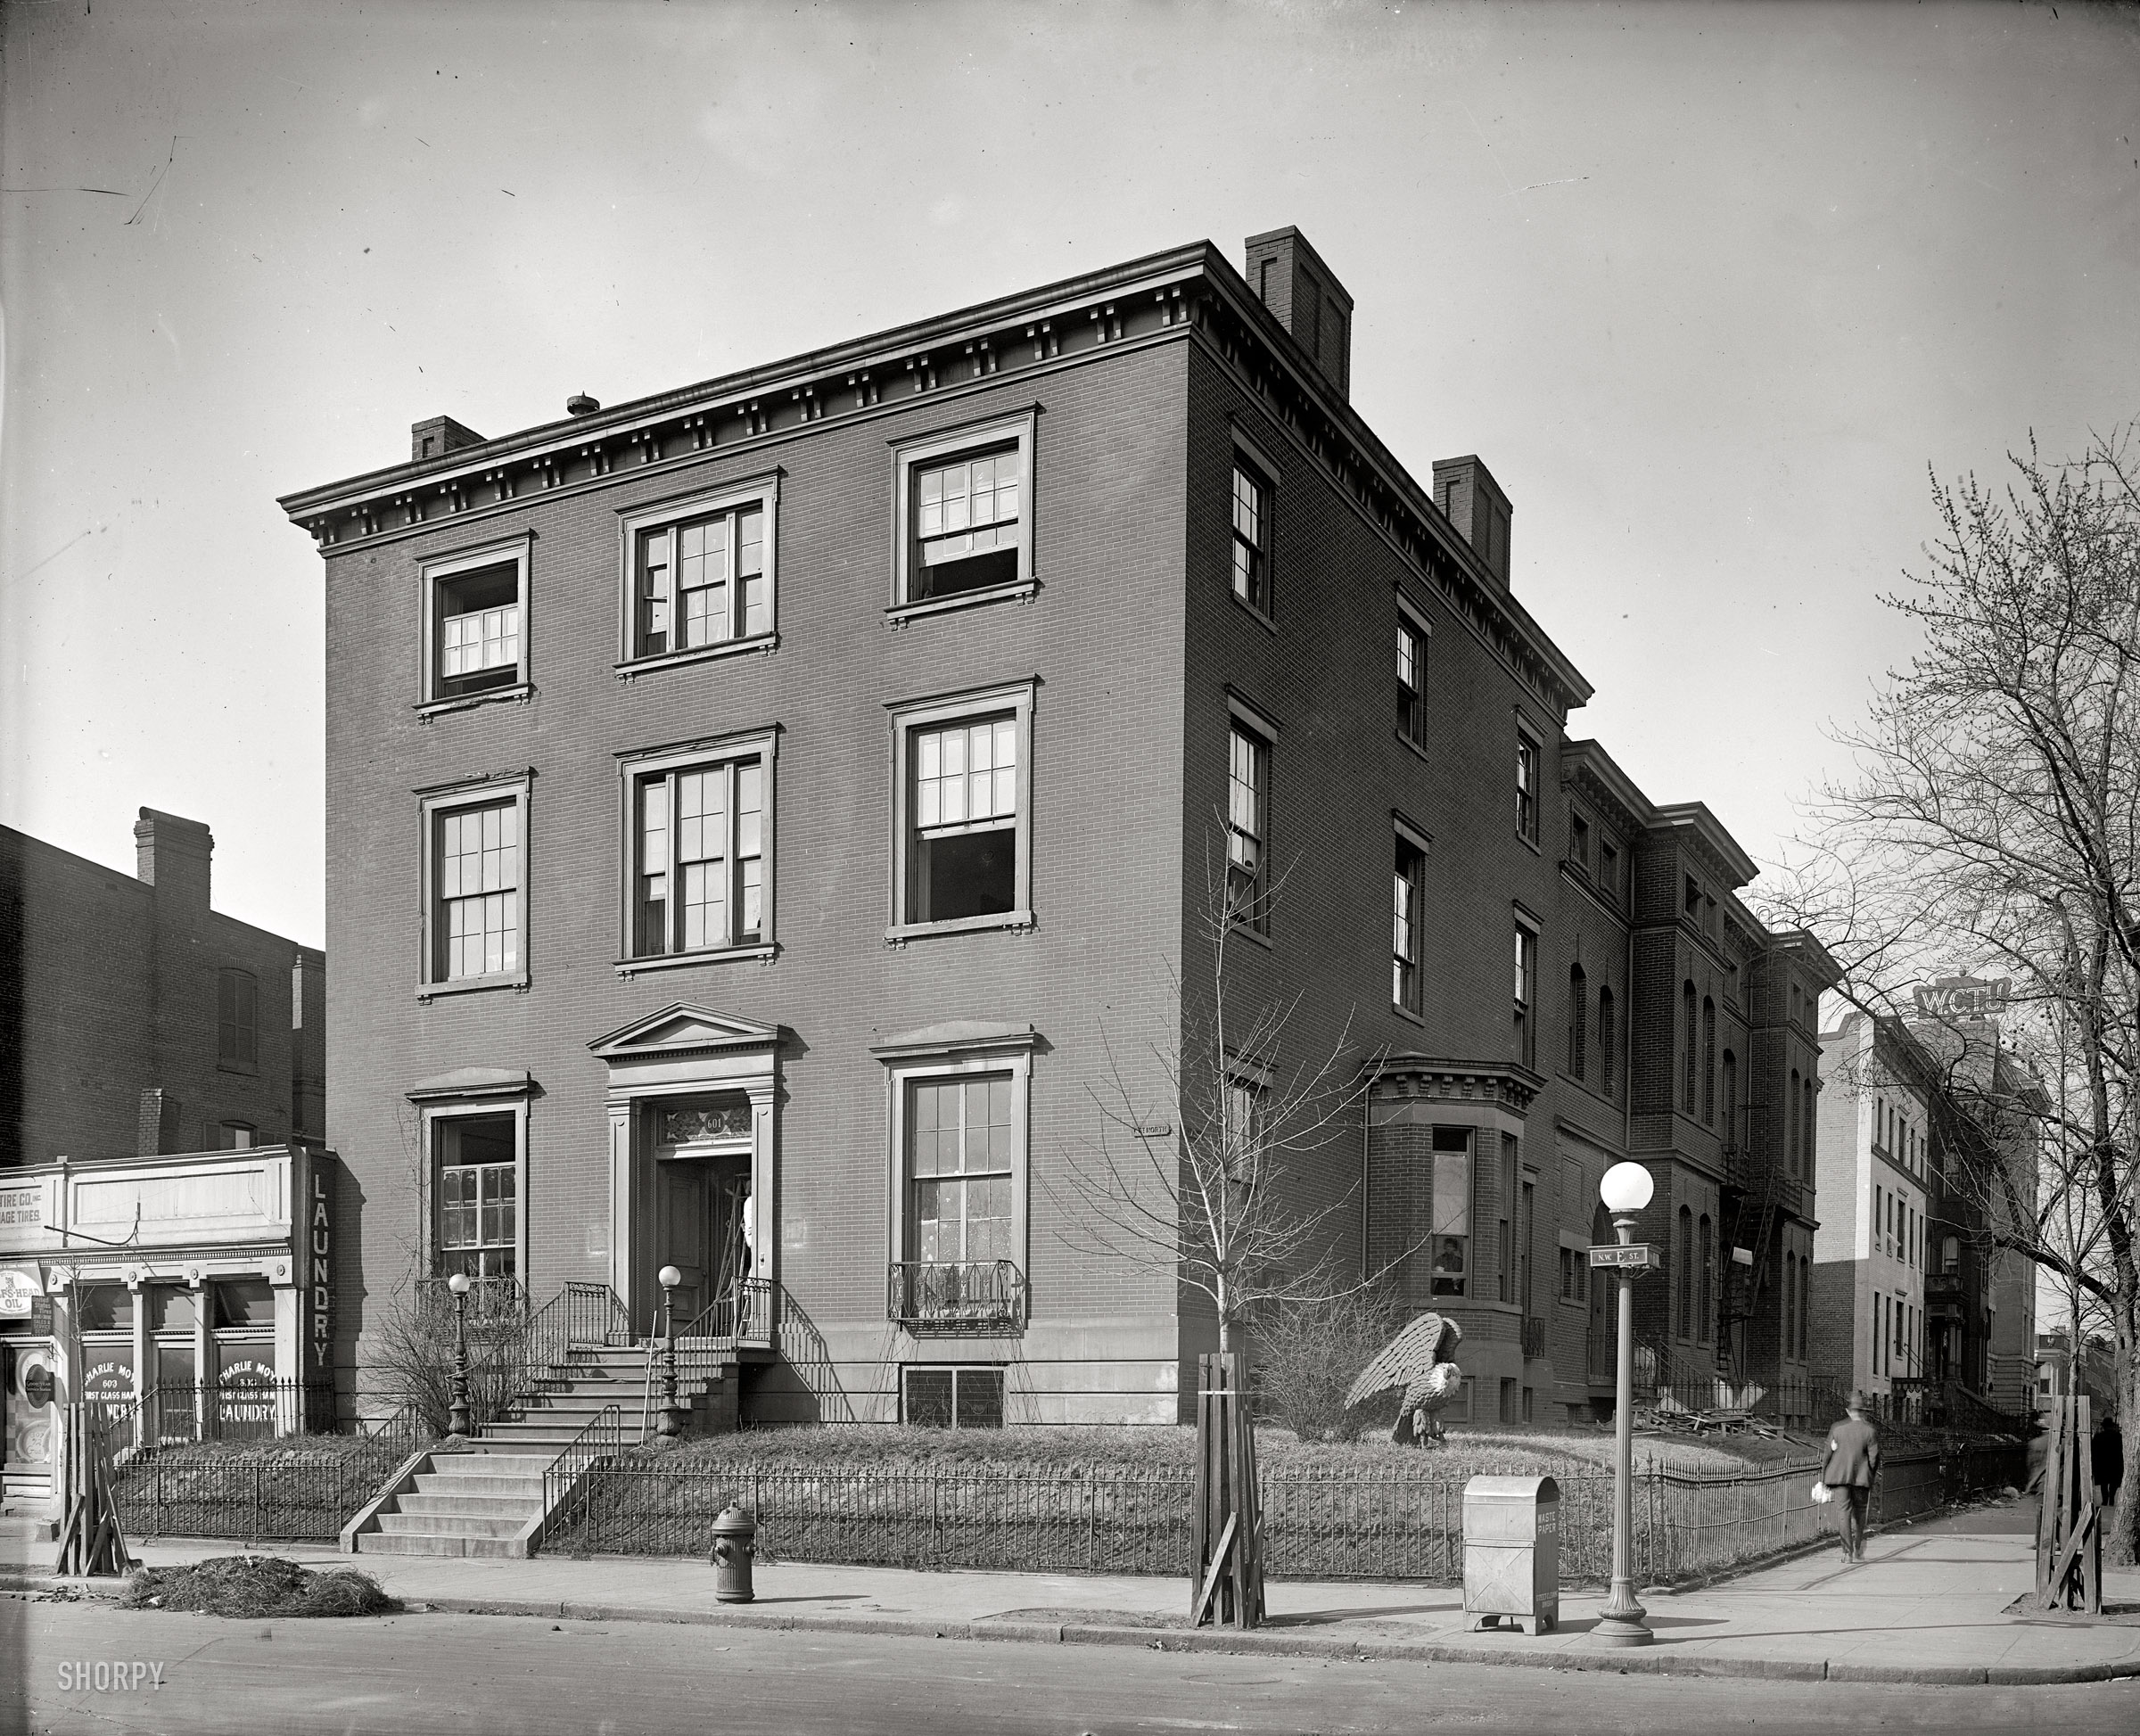 Washington, D.C., circa 1918. "Emergency Fleet Corporation, building exterior." E and Sixth streets N.W. Harris & Ewing Collection glass negative. View full size.